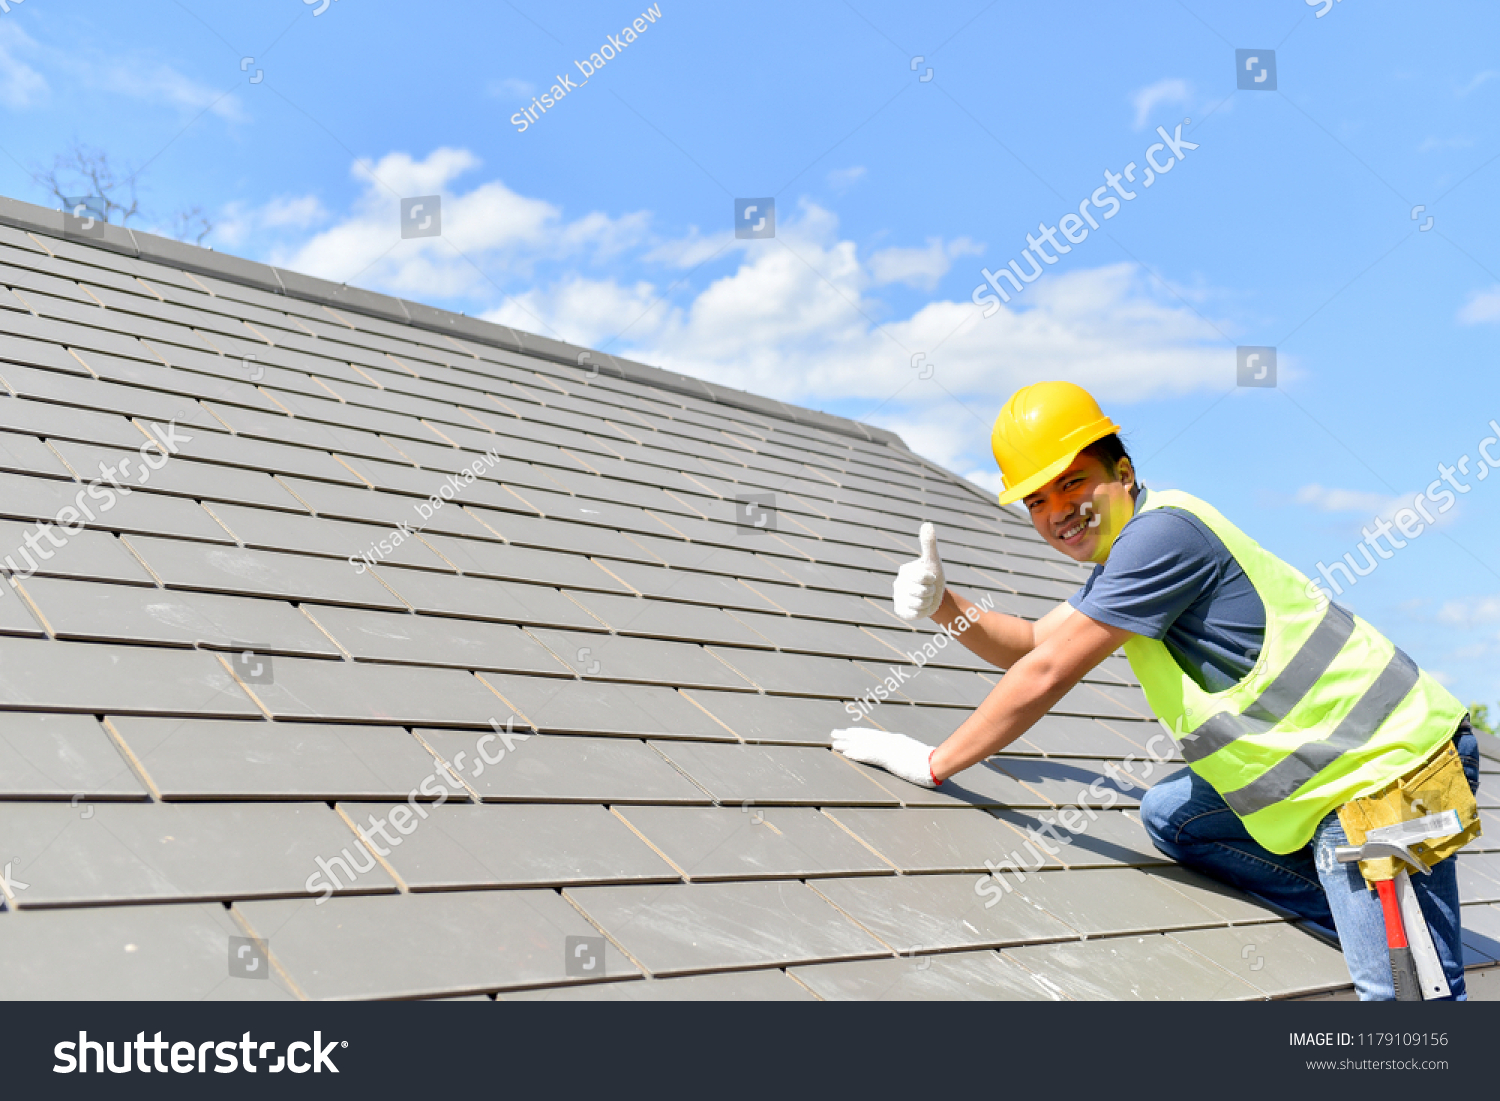 Builder Working On Roof Of New Building #1179109156